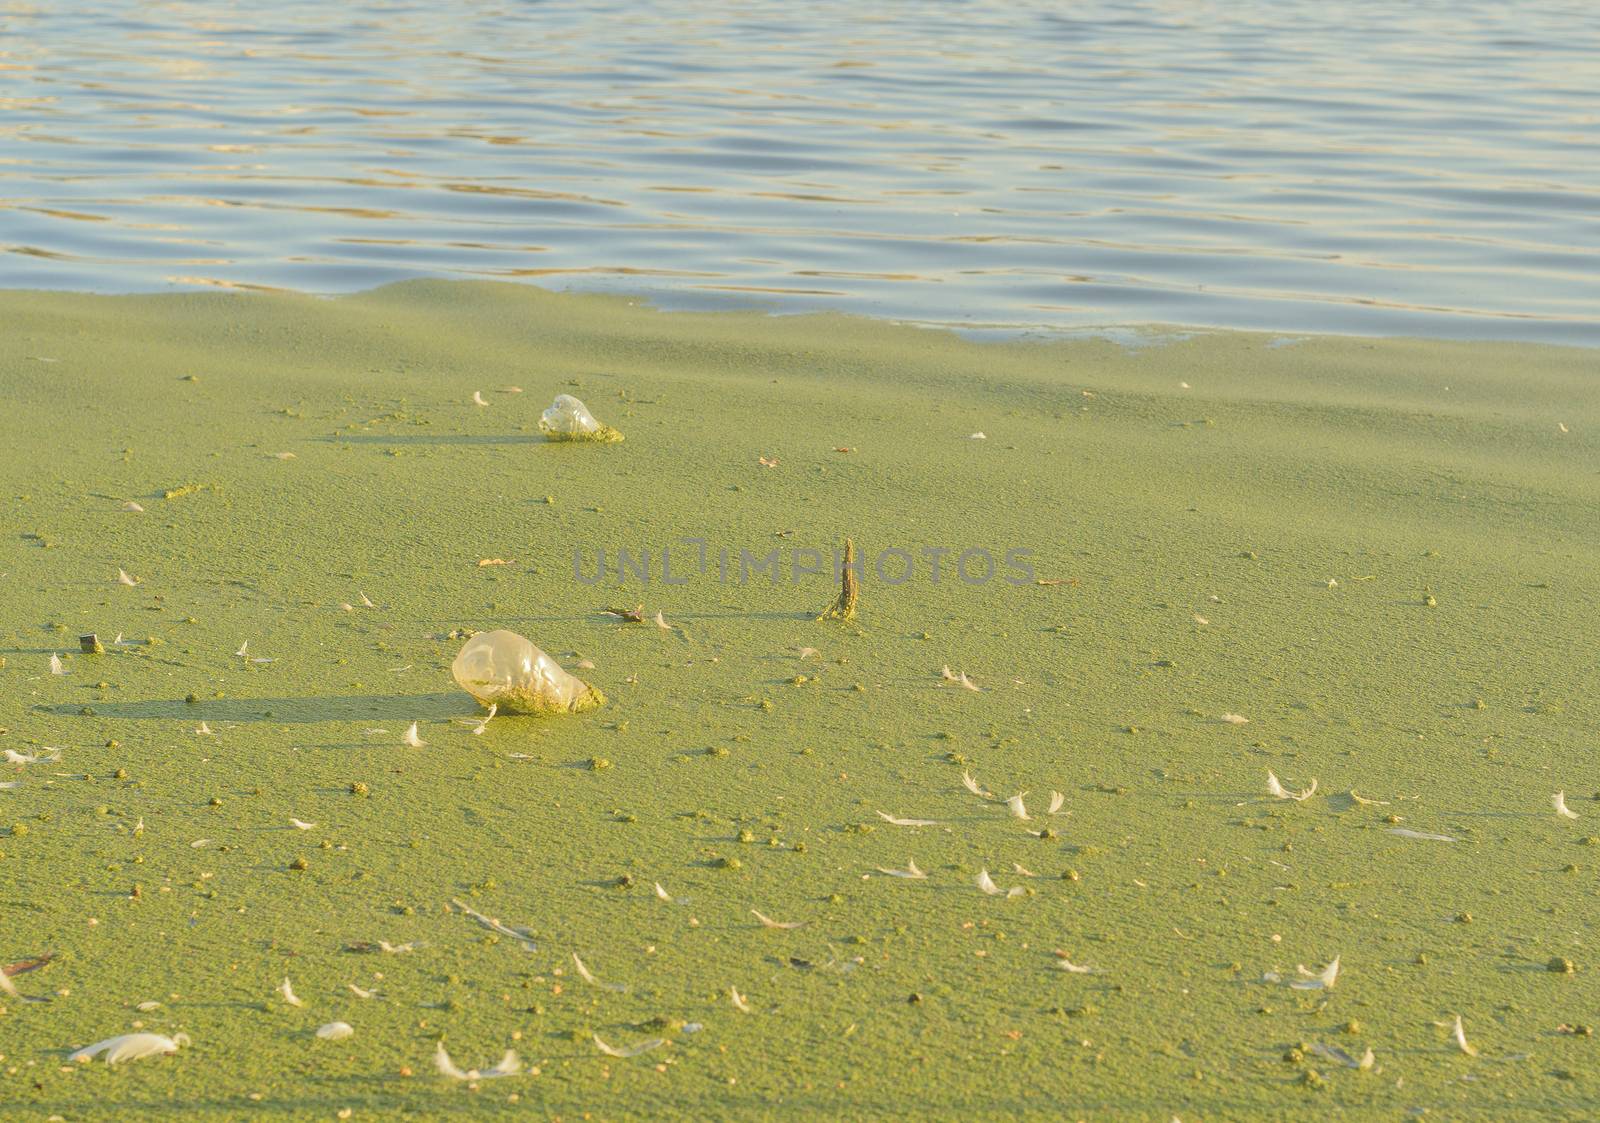 Two plastic bottles are submerged in the mud near the shore .Plastic pollution of the environment